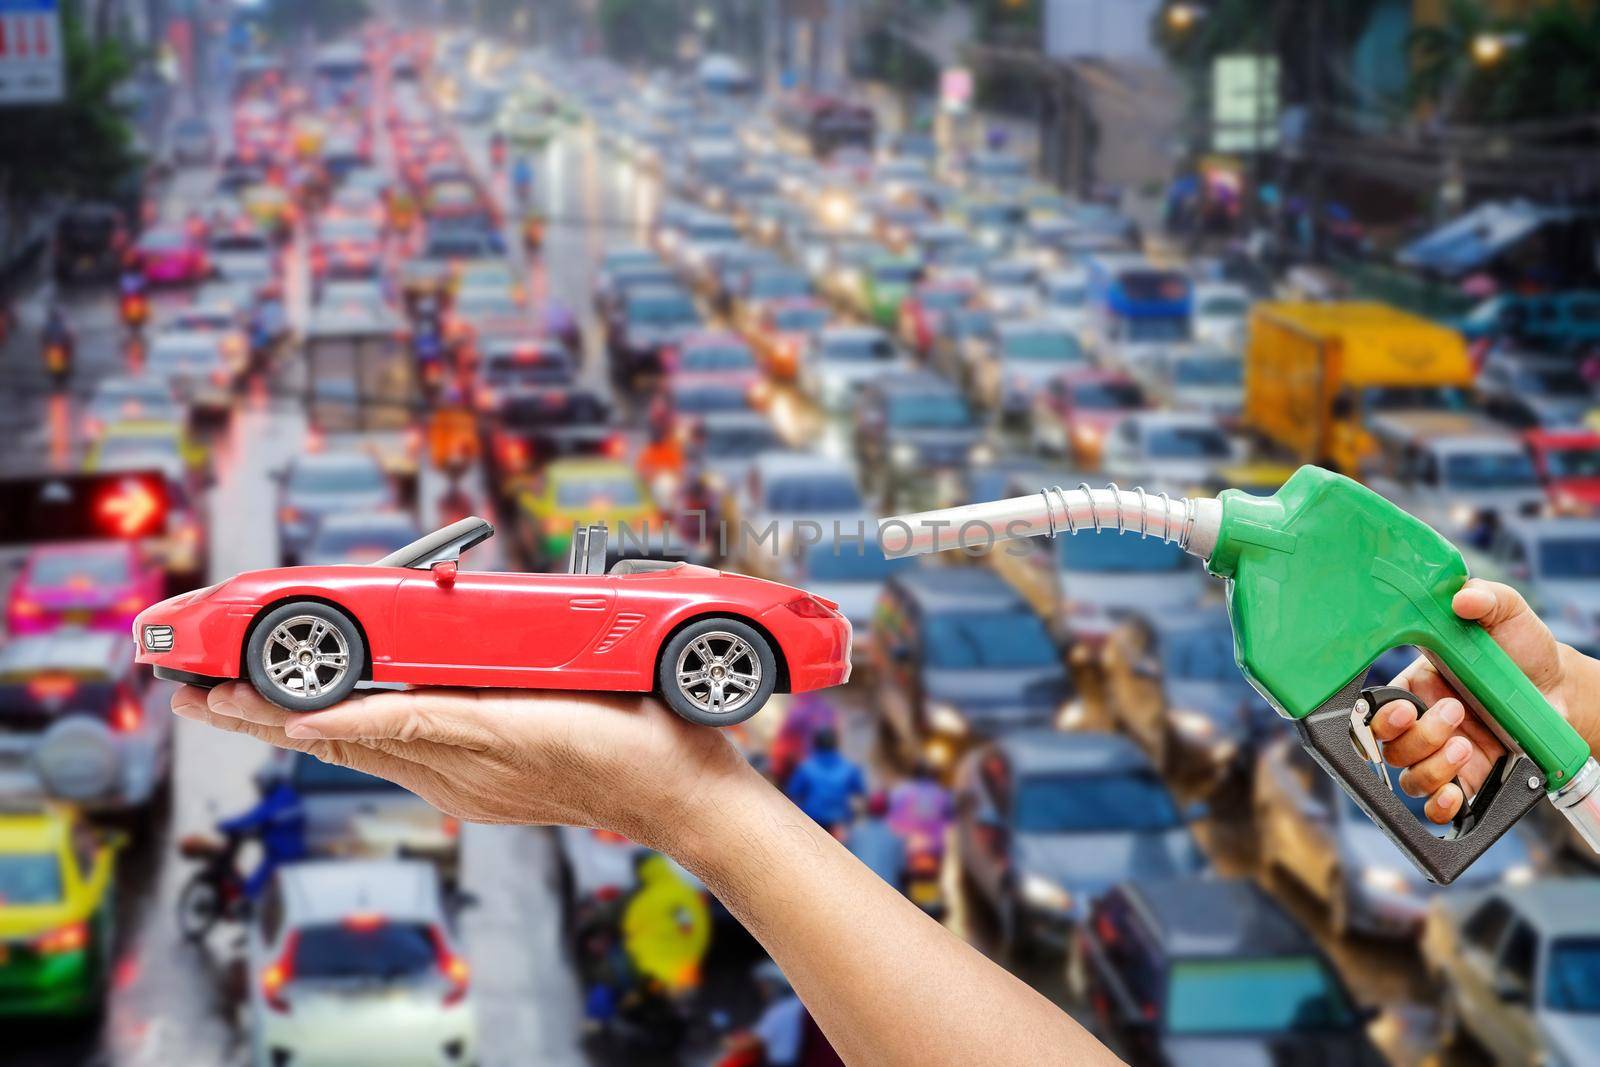 Right hands of men who were holding an automatic nozzle to make refill oil on red toy car on left hand with traffic jam on blurred background. concept idea about industry oil energy